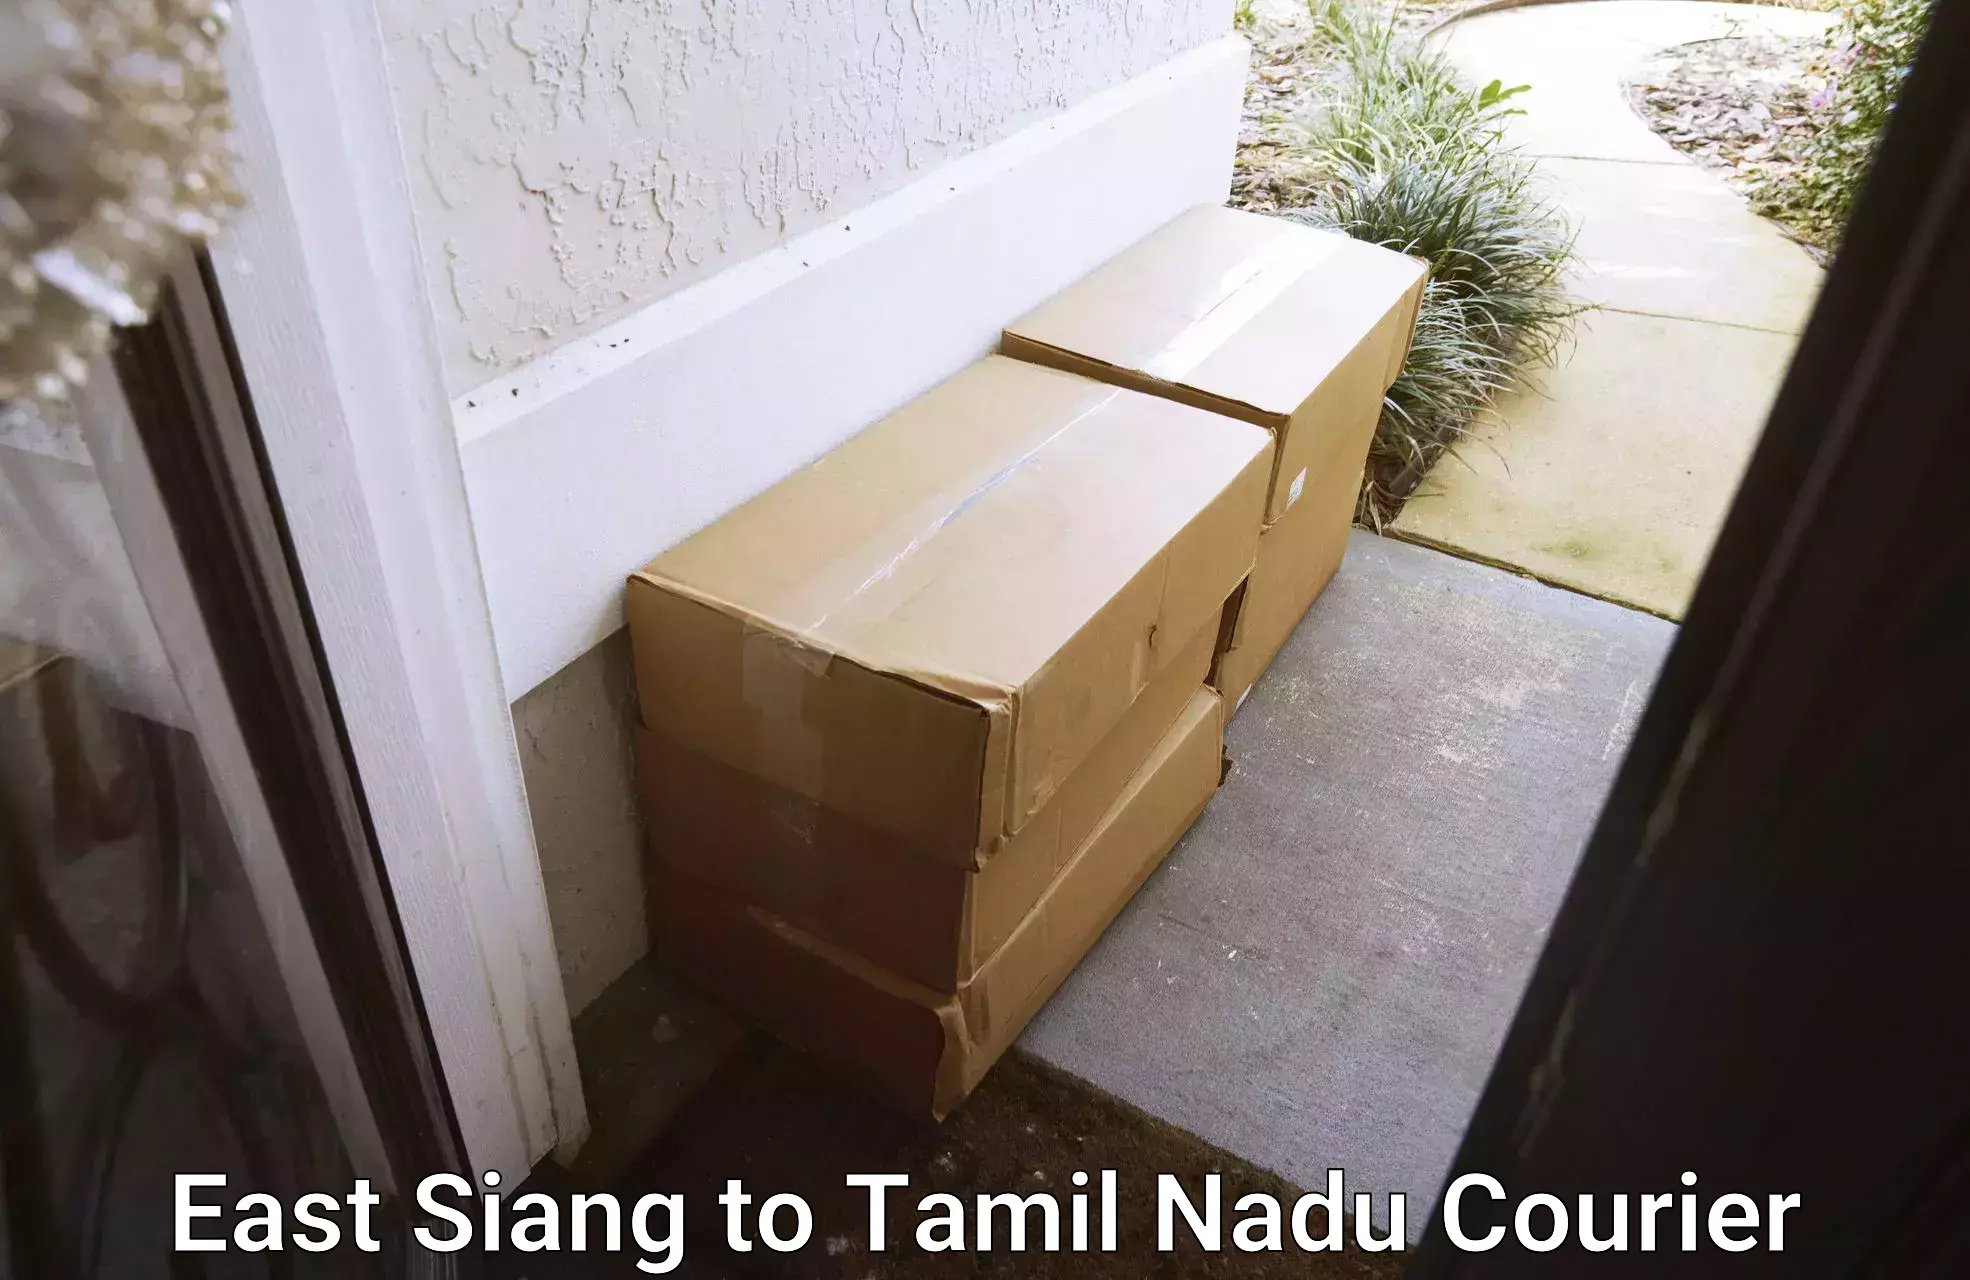 Sustainable courier practices East Siang to Tamil Nadu